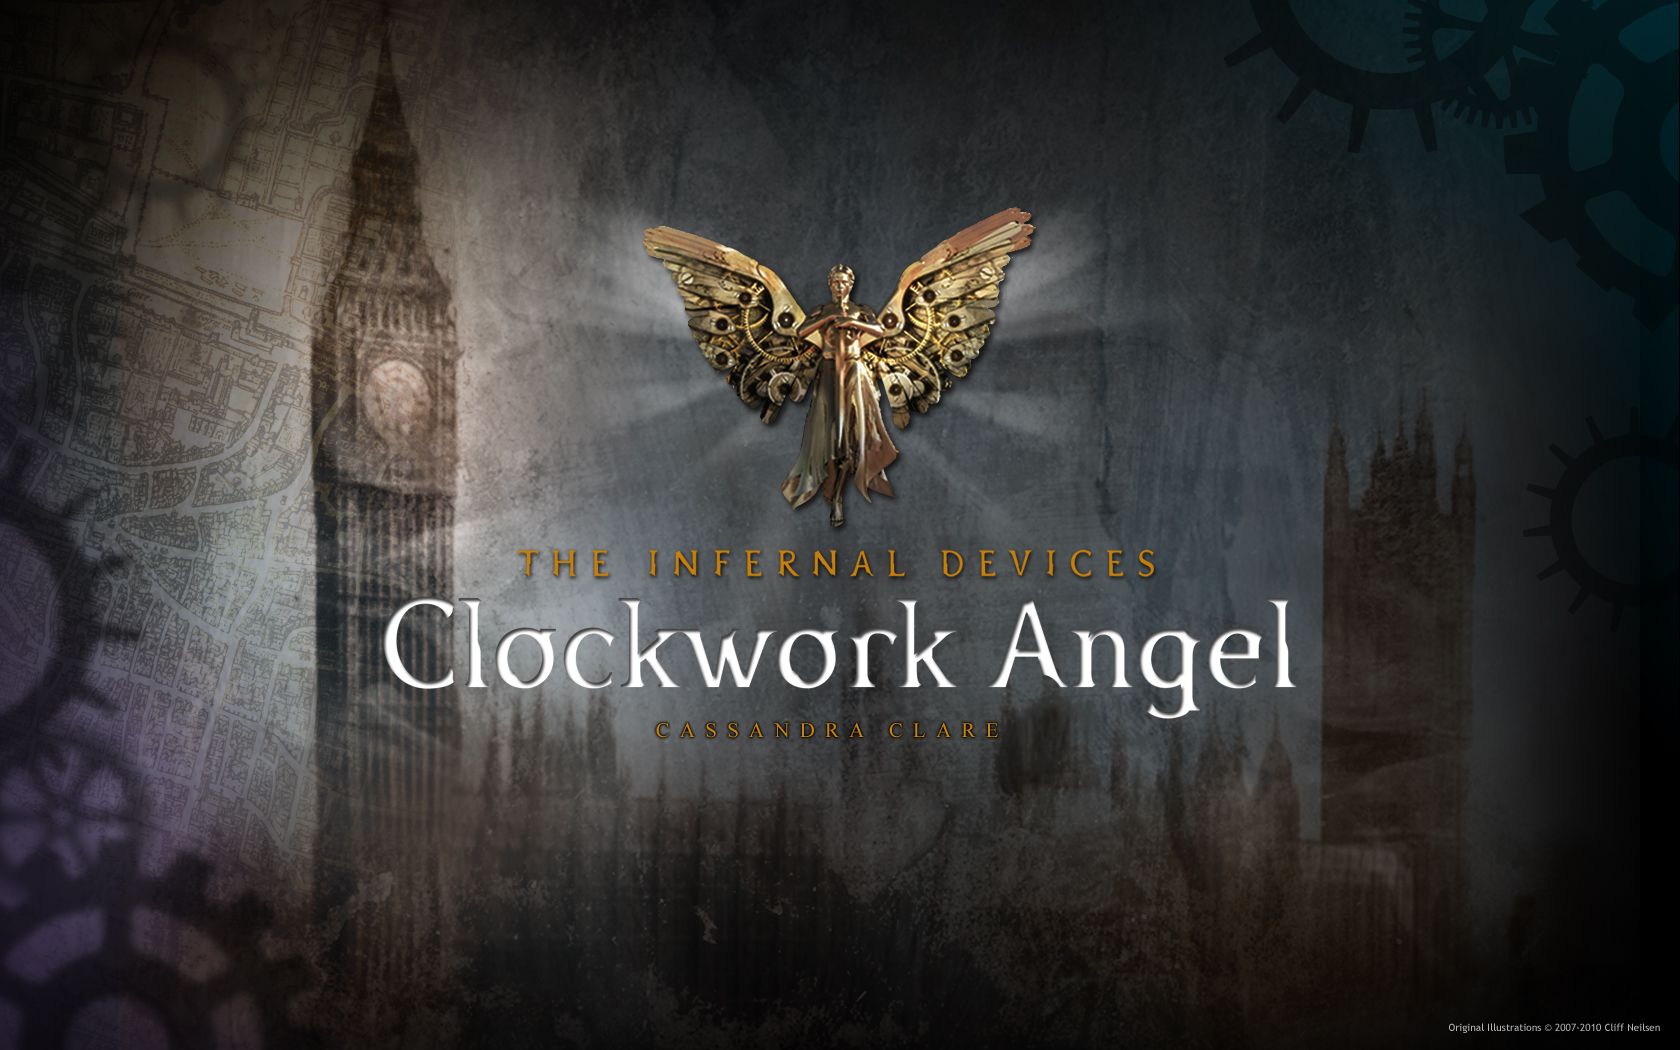 Book Review: The Infernal Devices